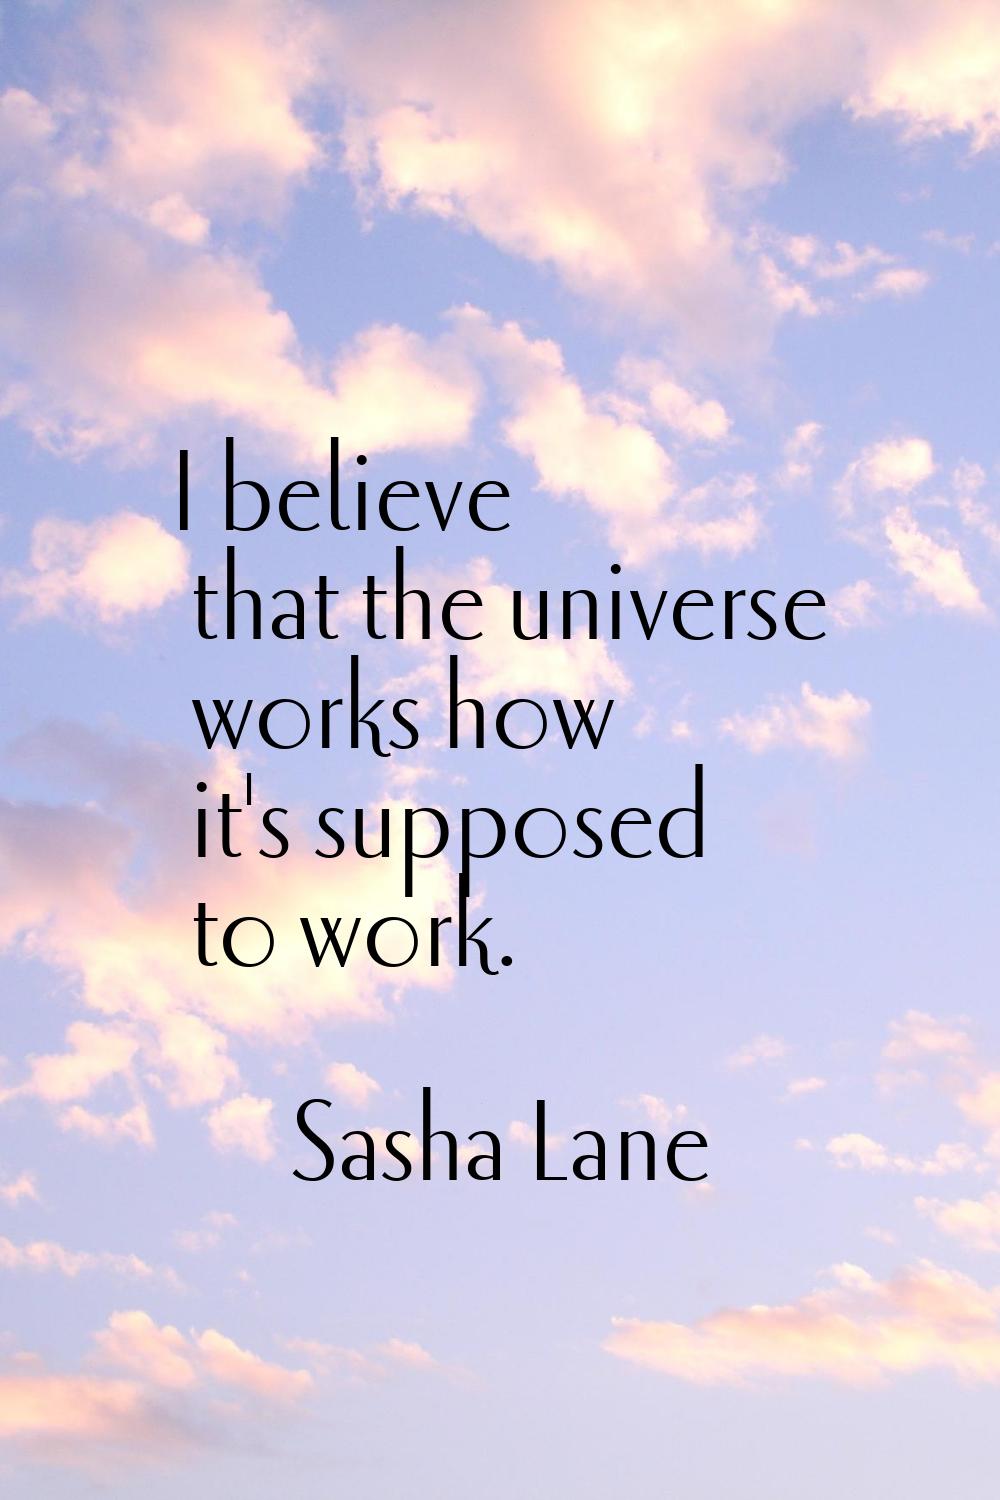 I believe that the universe works how it's supposed to work.